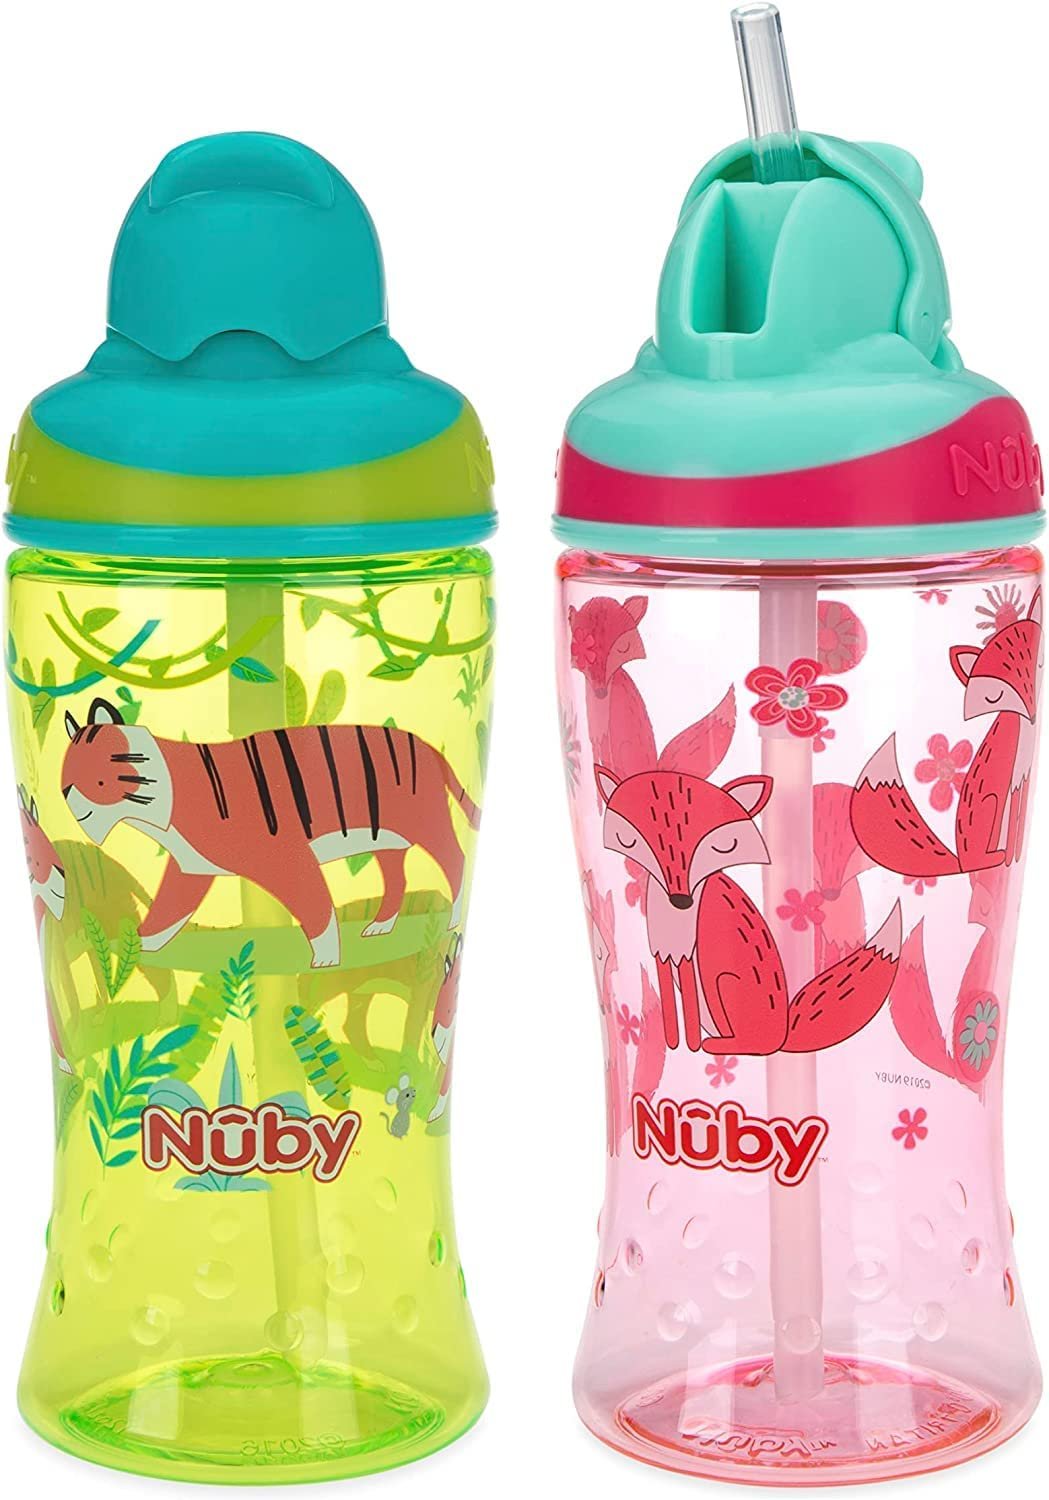 Nuby Thirsty Kids No-Spill Flip-it Printed Boost Cup with Thin Soft Straw - 12oz, 18+ Months, (adventure mountains/ space)